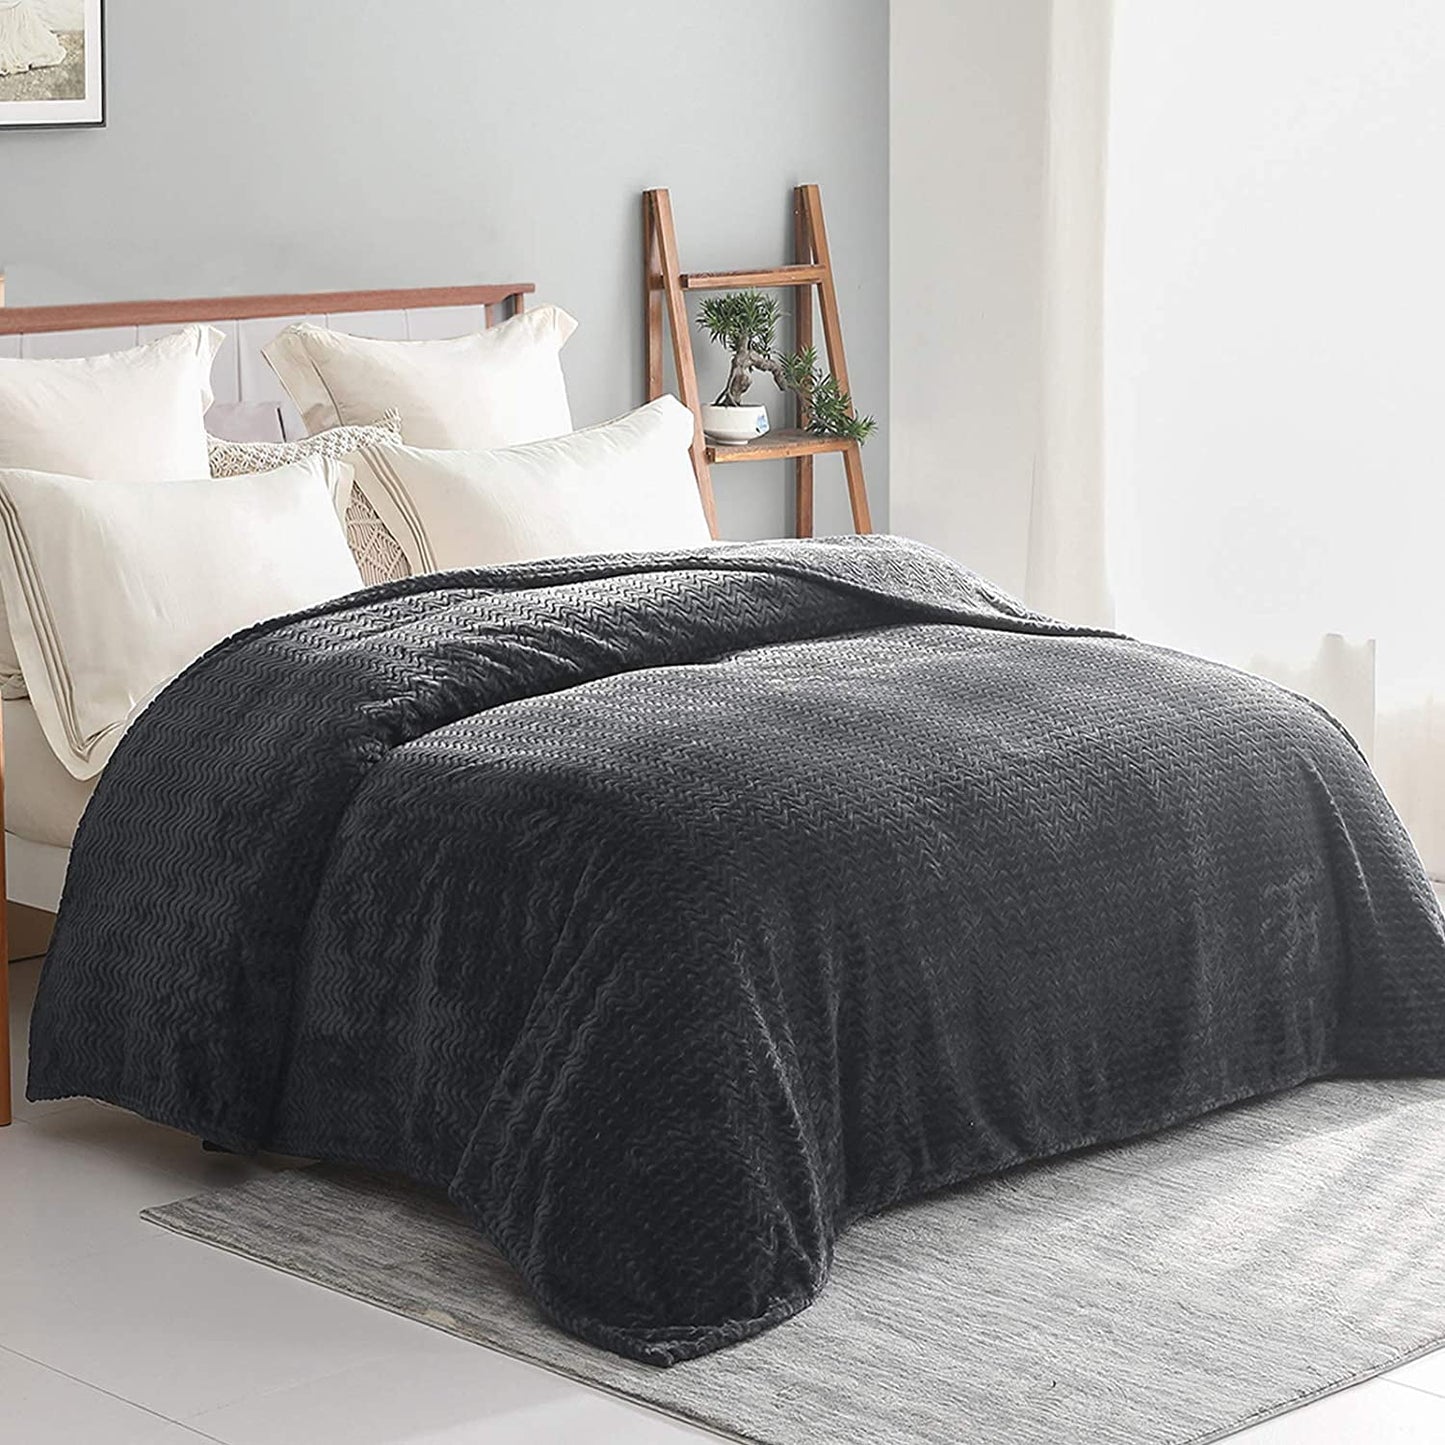 Exclusivo Mezcla Queen Size Jacquard Weave Wave Pattern Flannel Fleece Velvet Plush Bed Blanket as Bedspread/Coverlet/Bed Cover (90" x 90", Grey) - Soft, Lightweight, Warm and Cozy